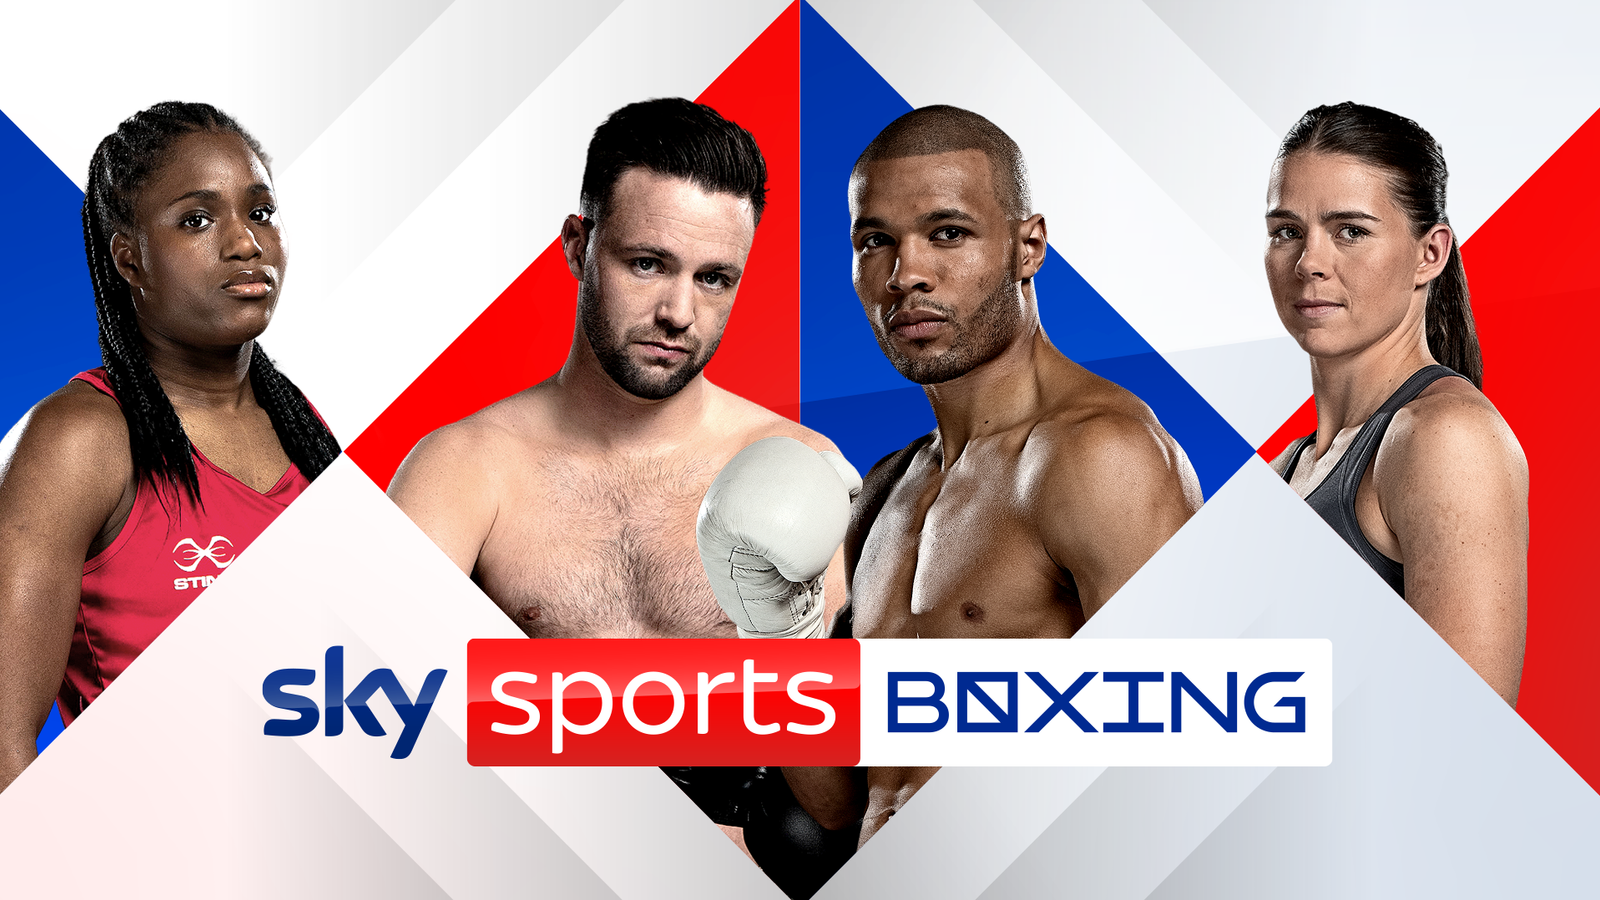 sky box office boxing schedule